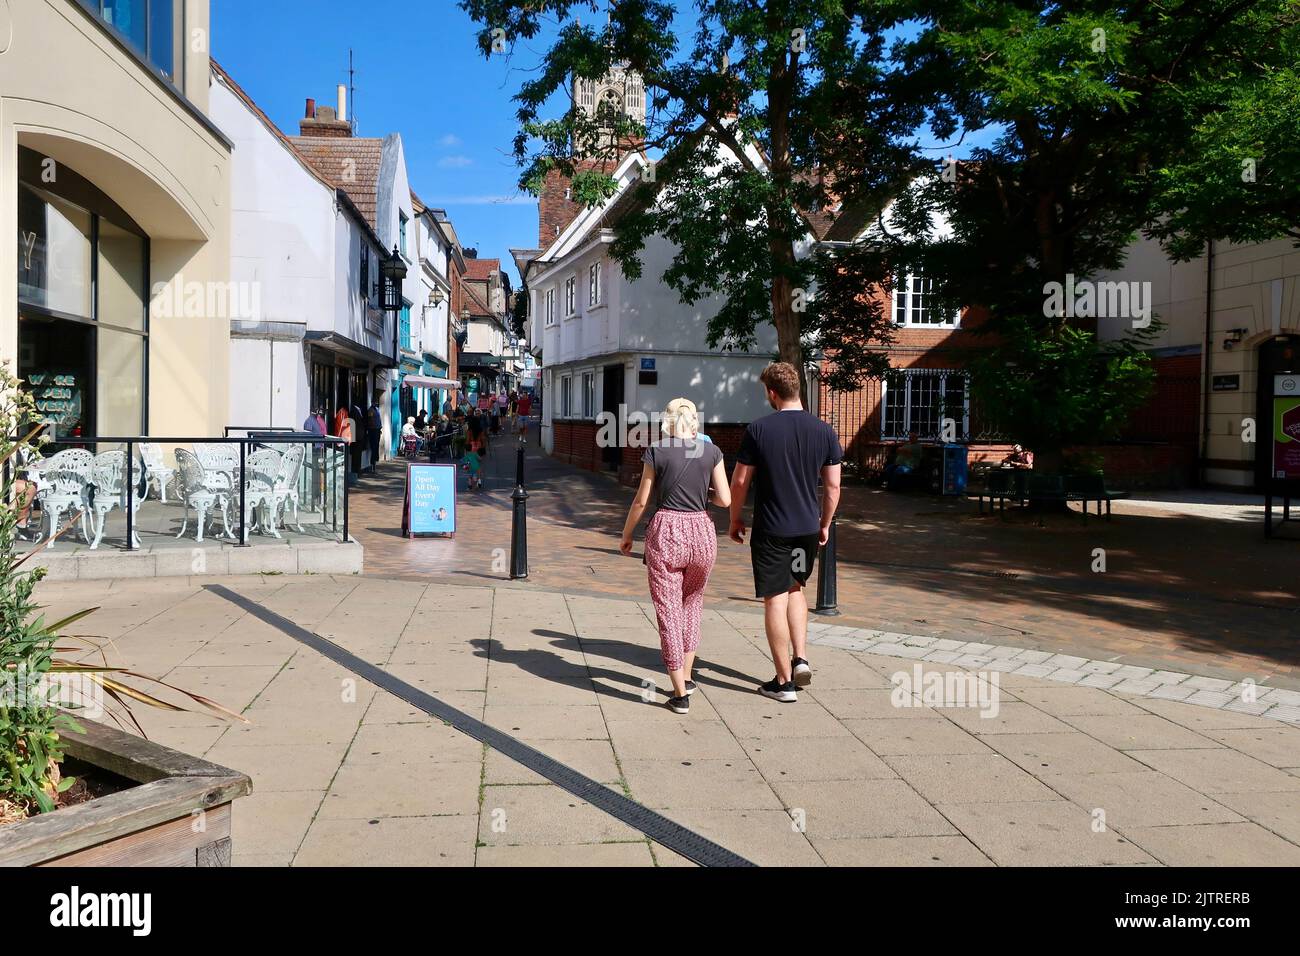 Ipswich, Suffolk, UK - 1 September 2022: Bright sunny morning in the town centre.St Stephens Lane. Stock Photo